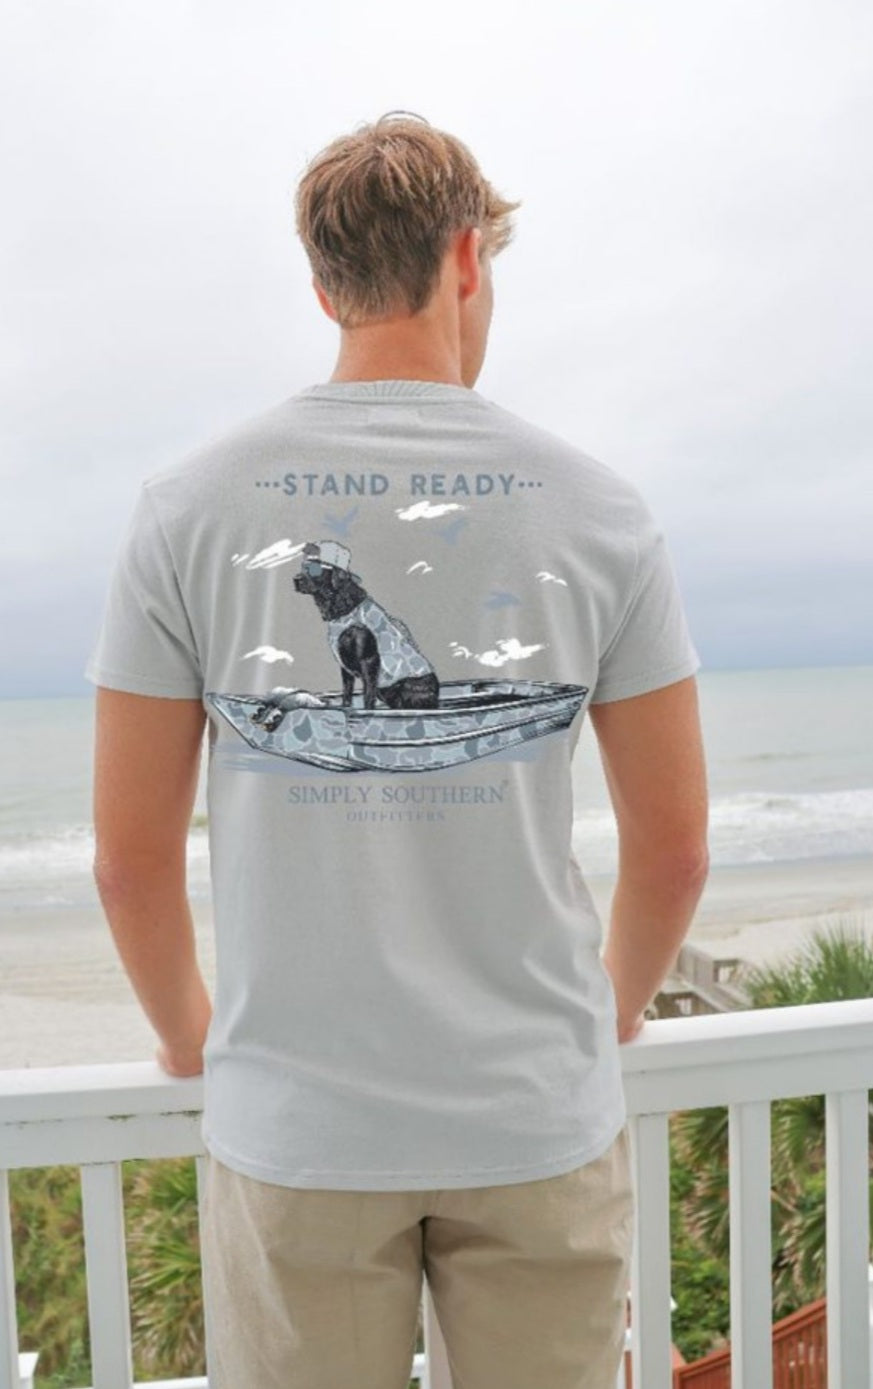 Simply southern youth stand ready tee